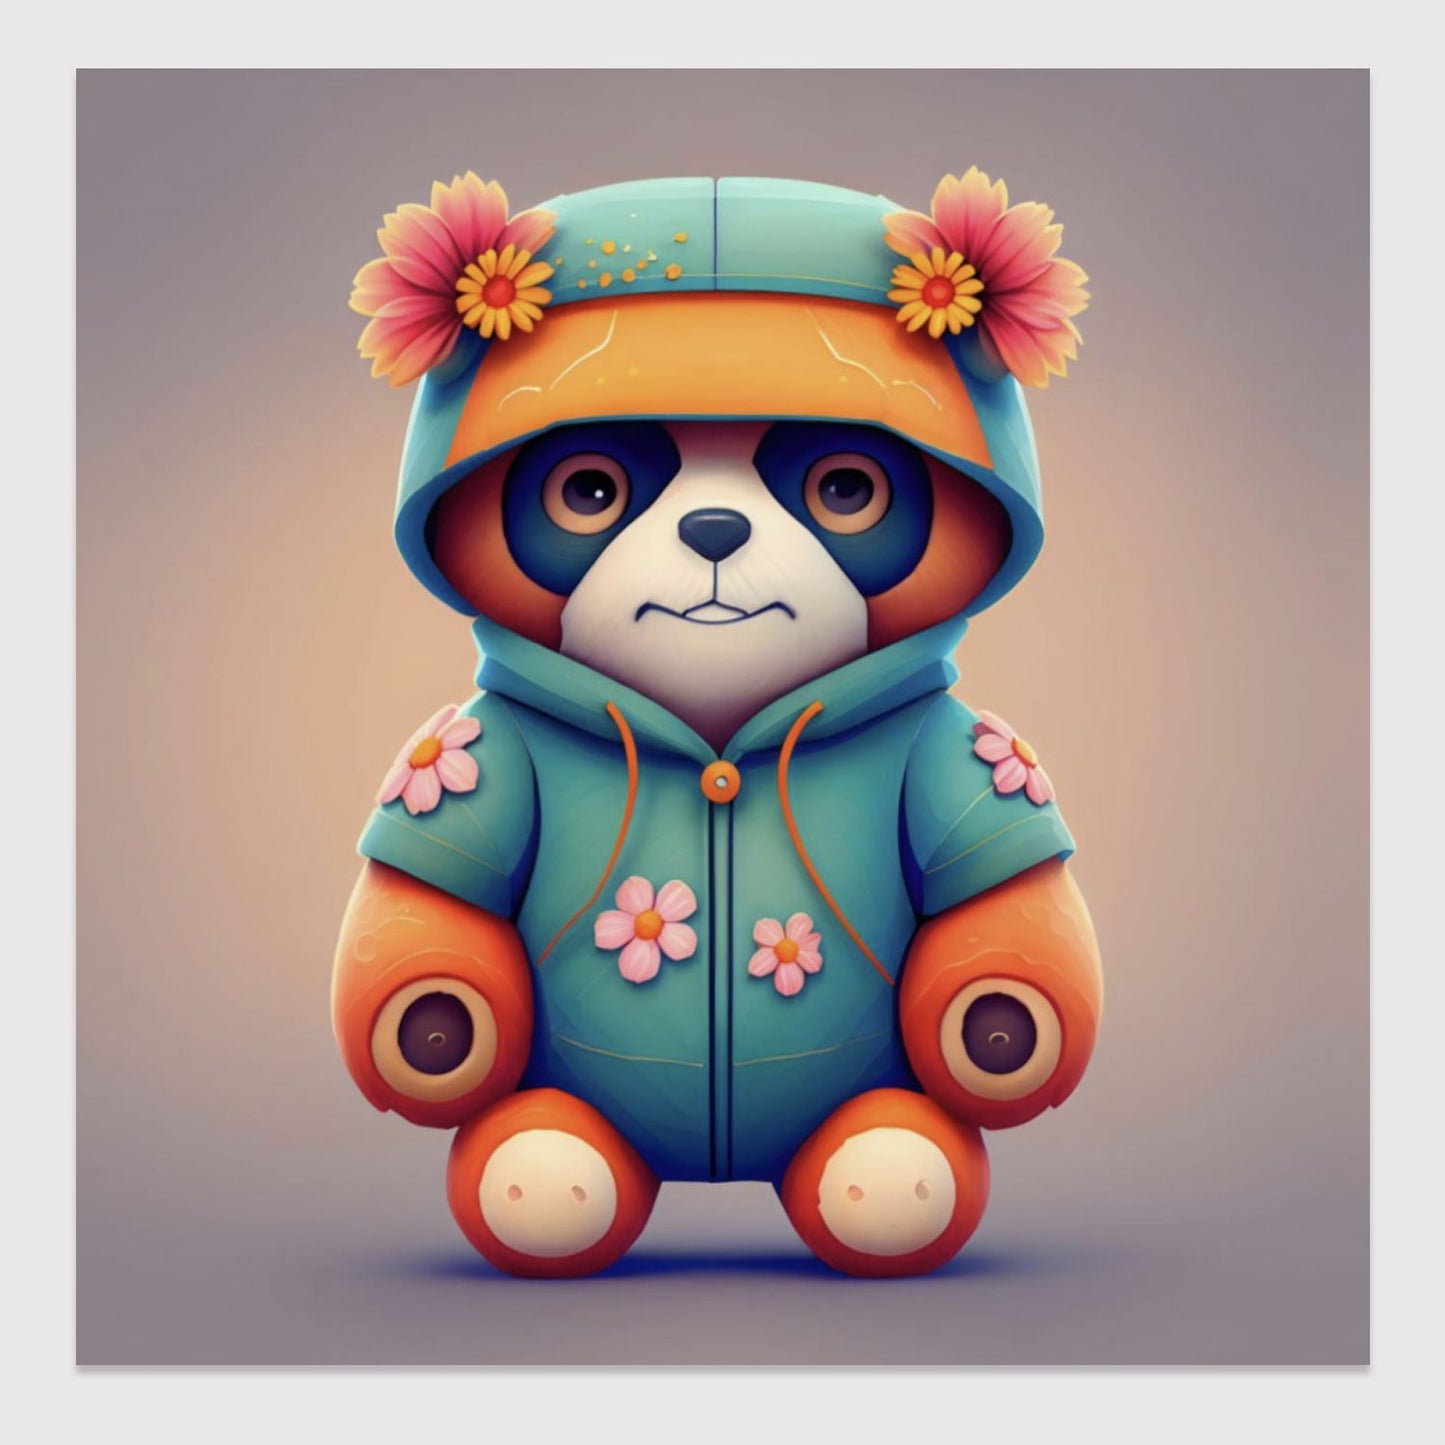 Floral Teddy Poster